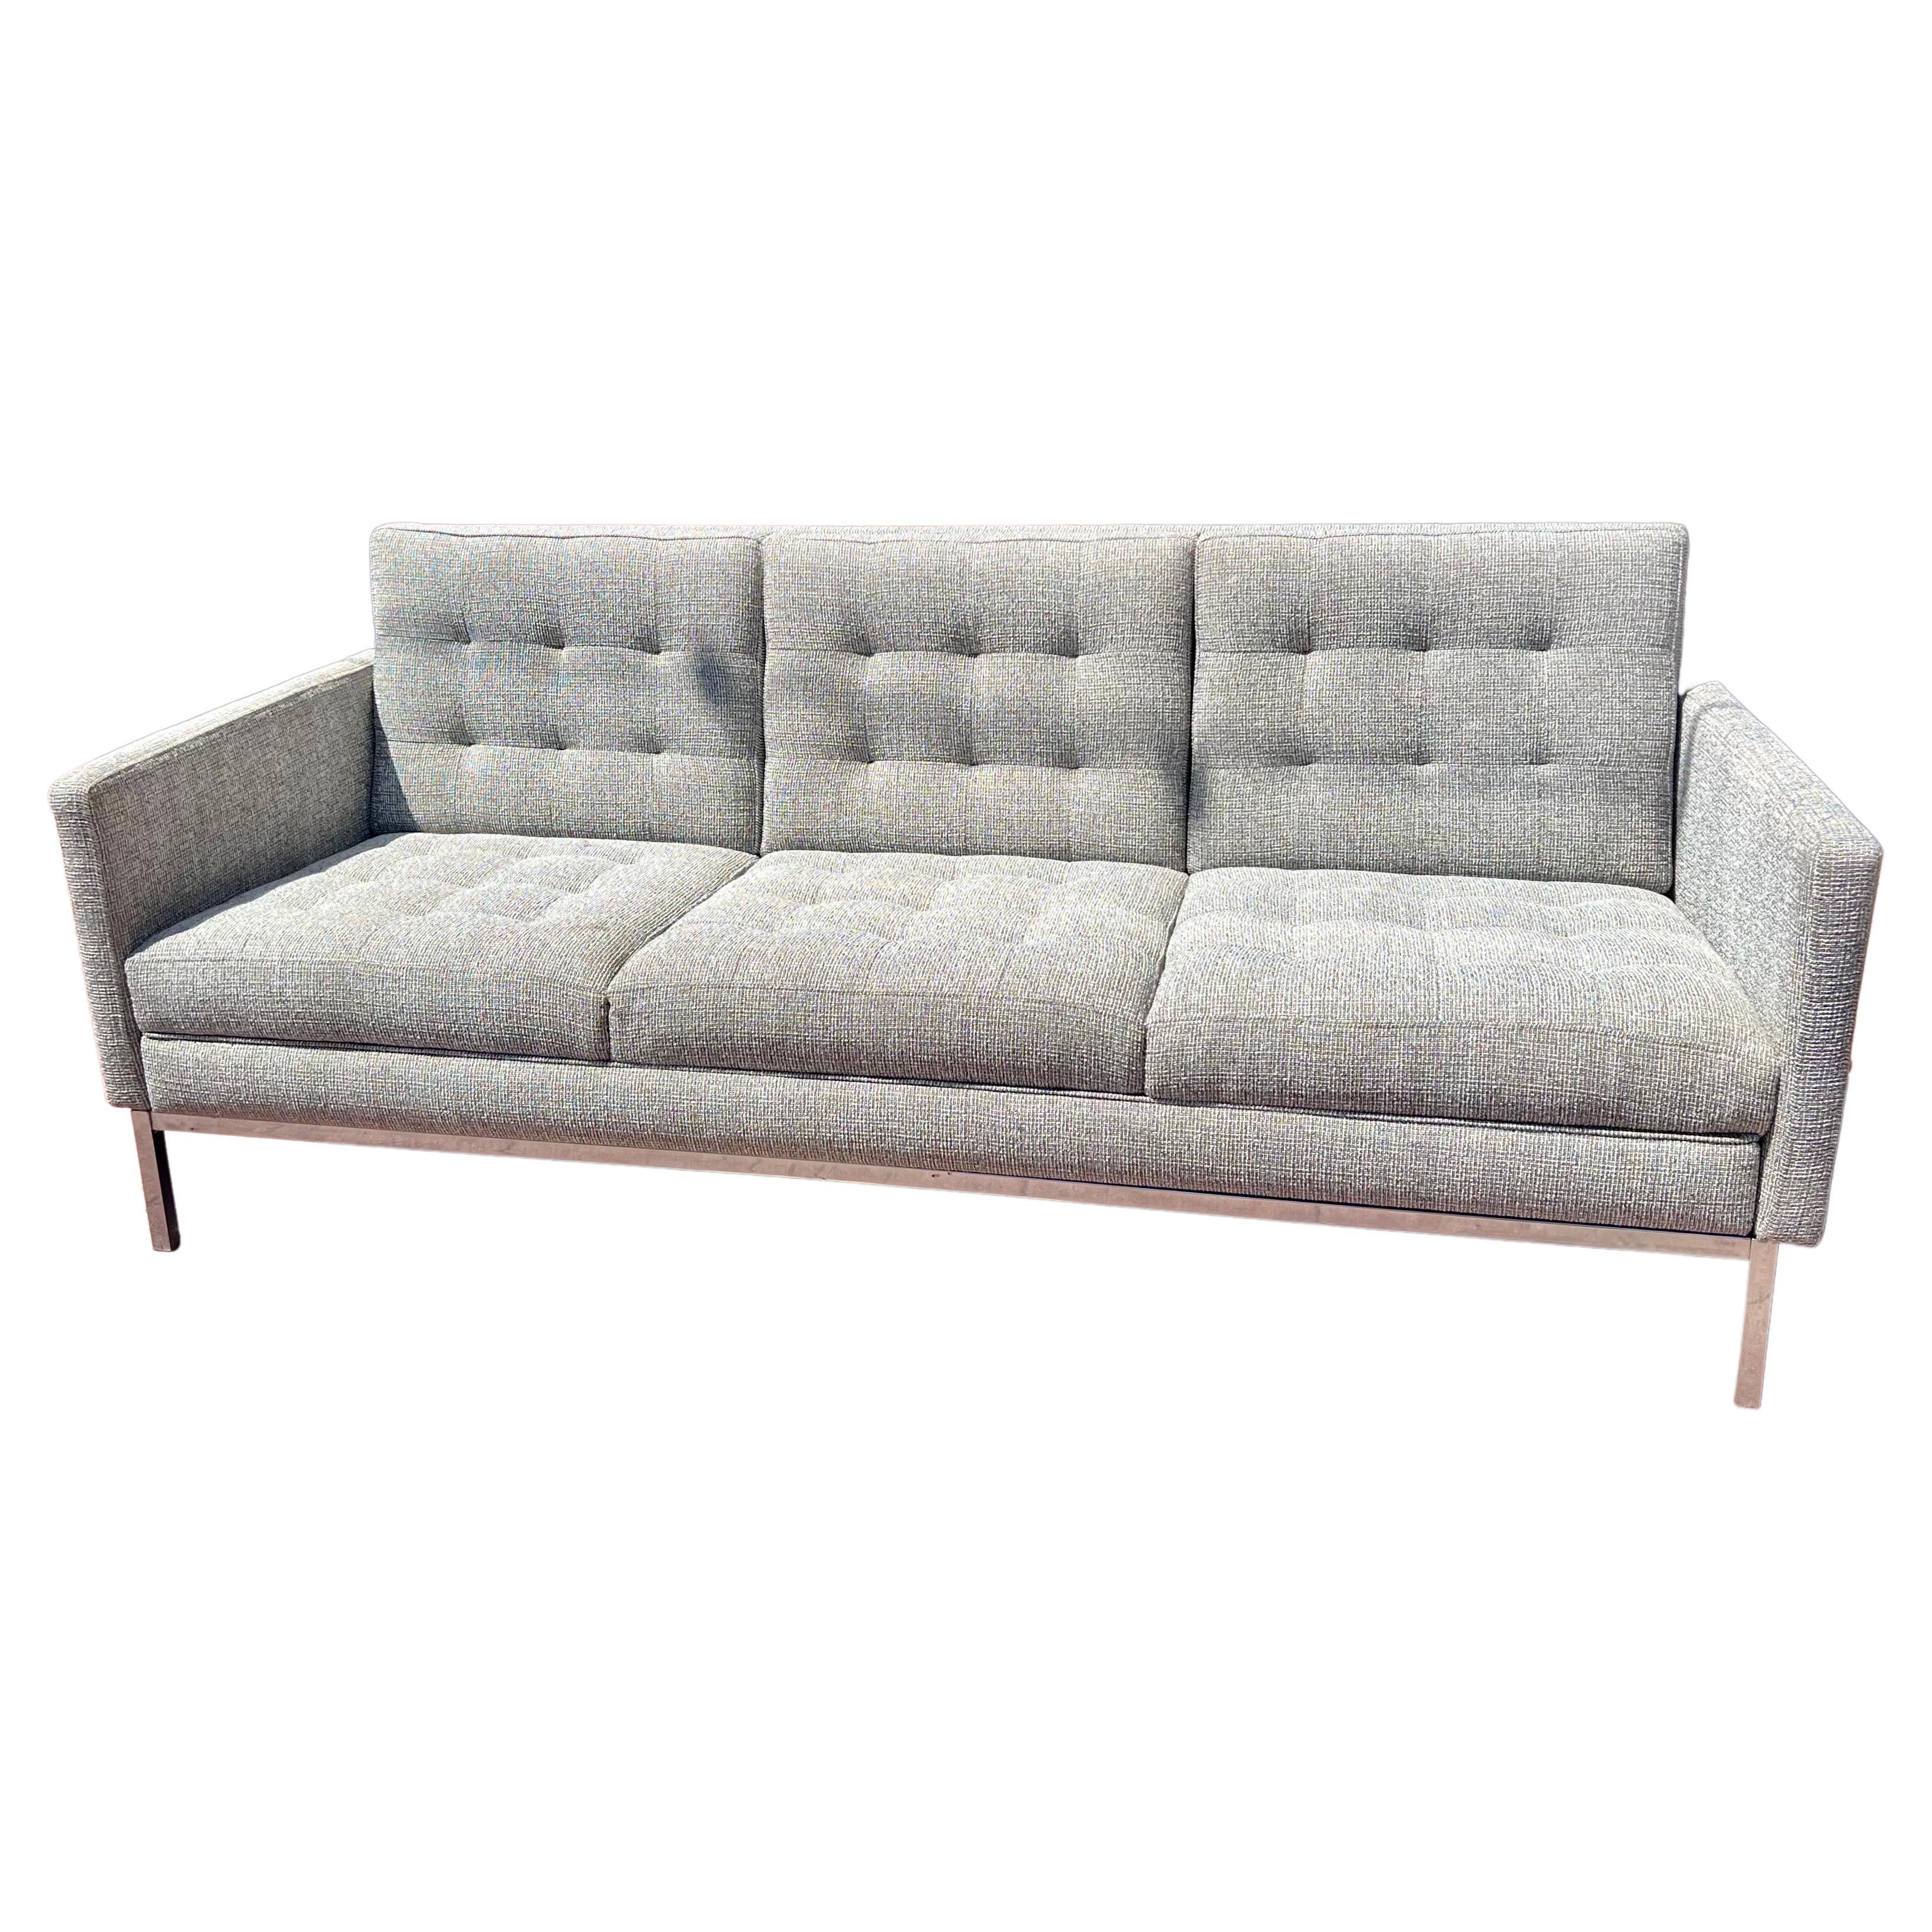 20th Century American Mid Century Modern Steelcase 3 Seater Sofa Chrome Base New Fabric For Sale